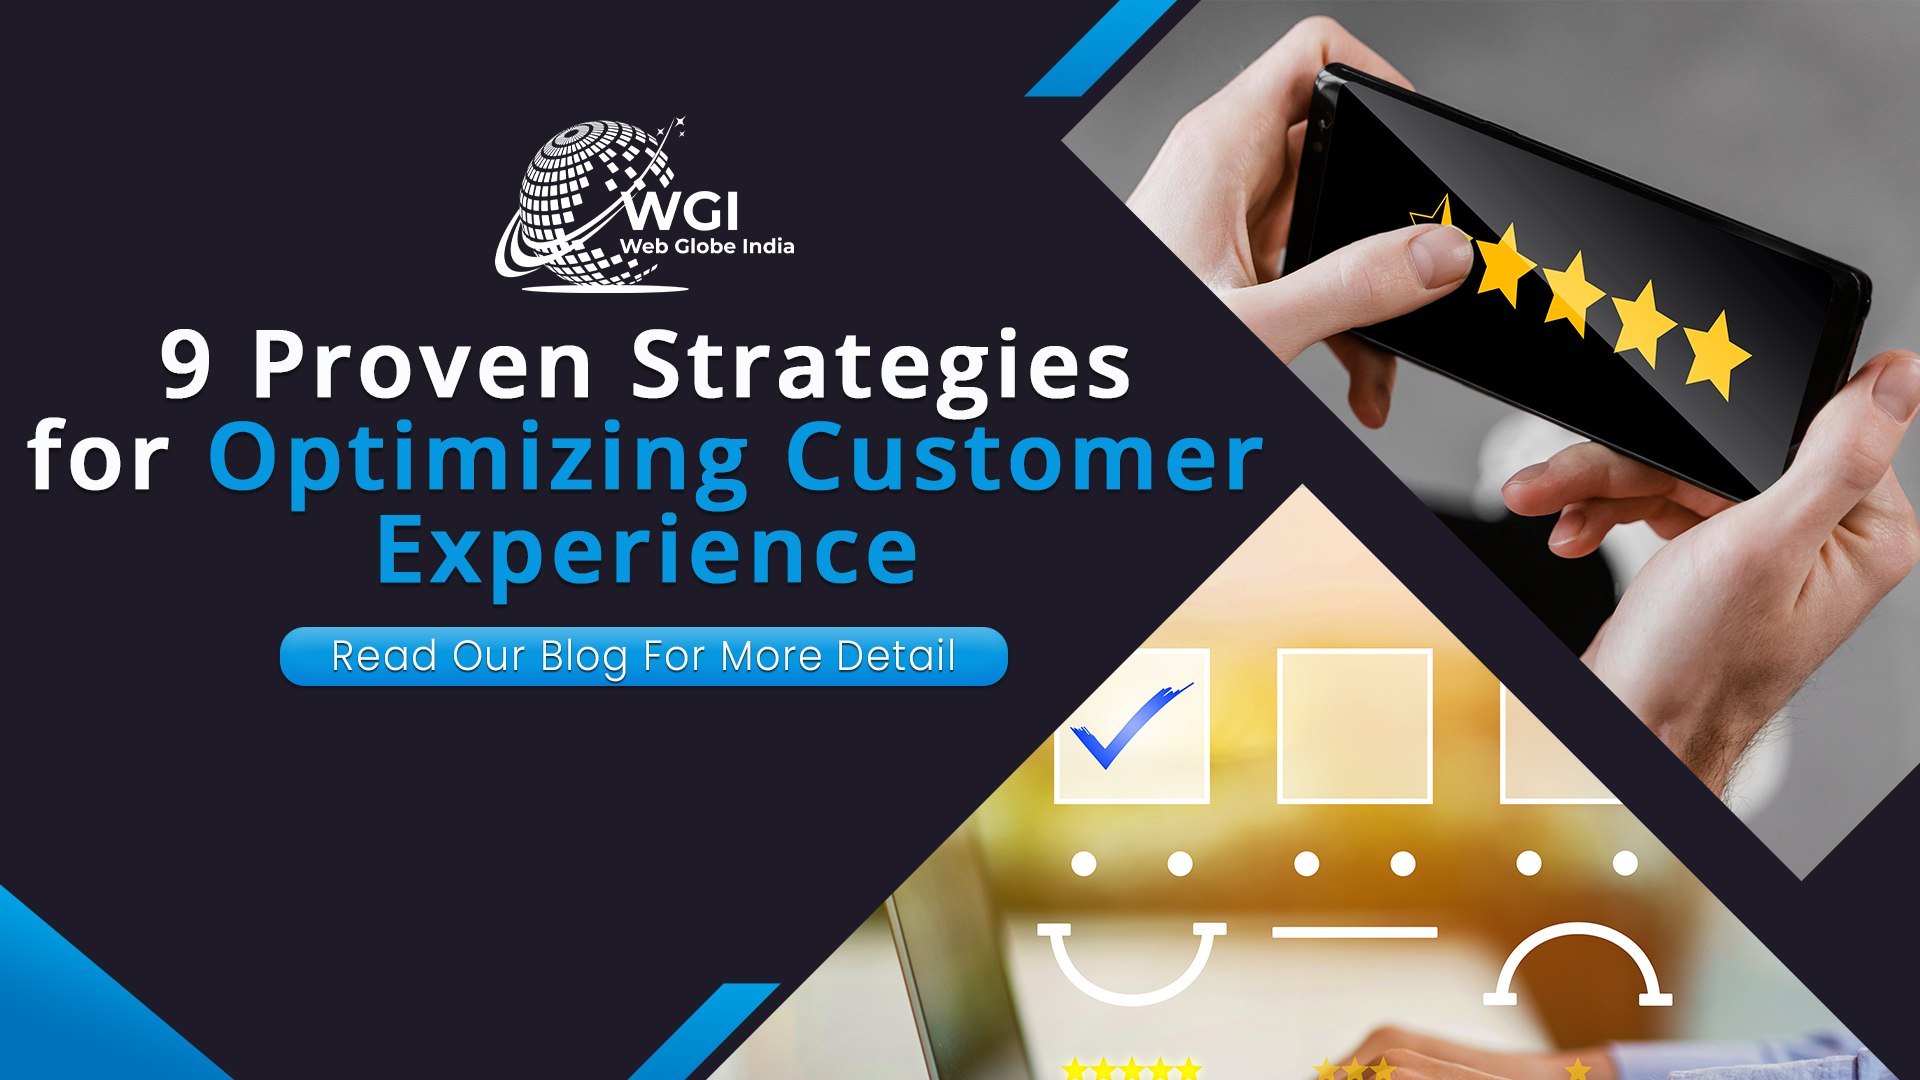 9 Proven Strategies for Optimizing Customer Experience